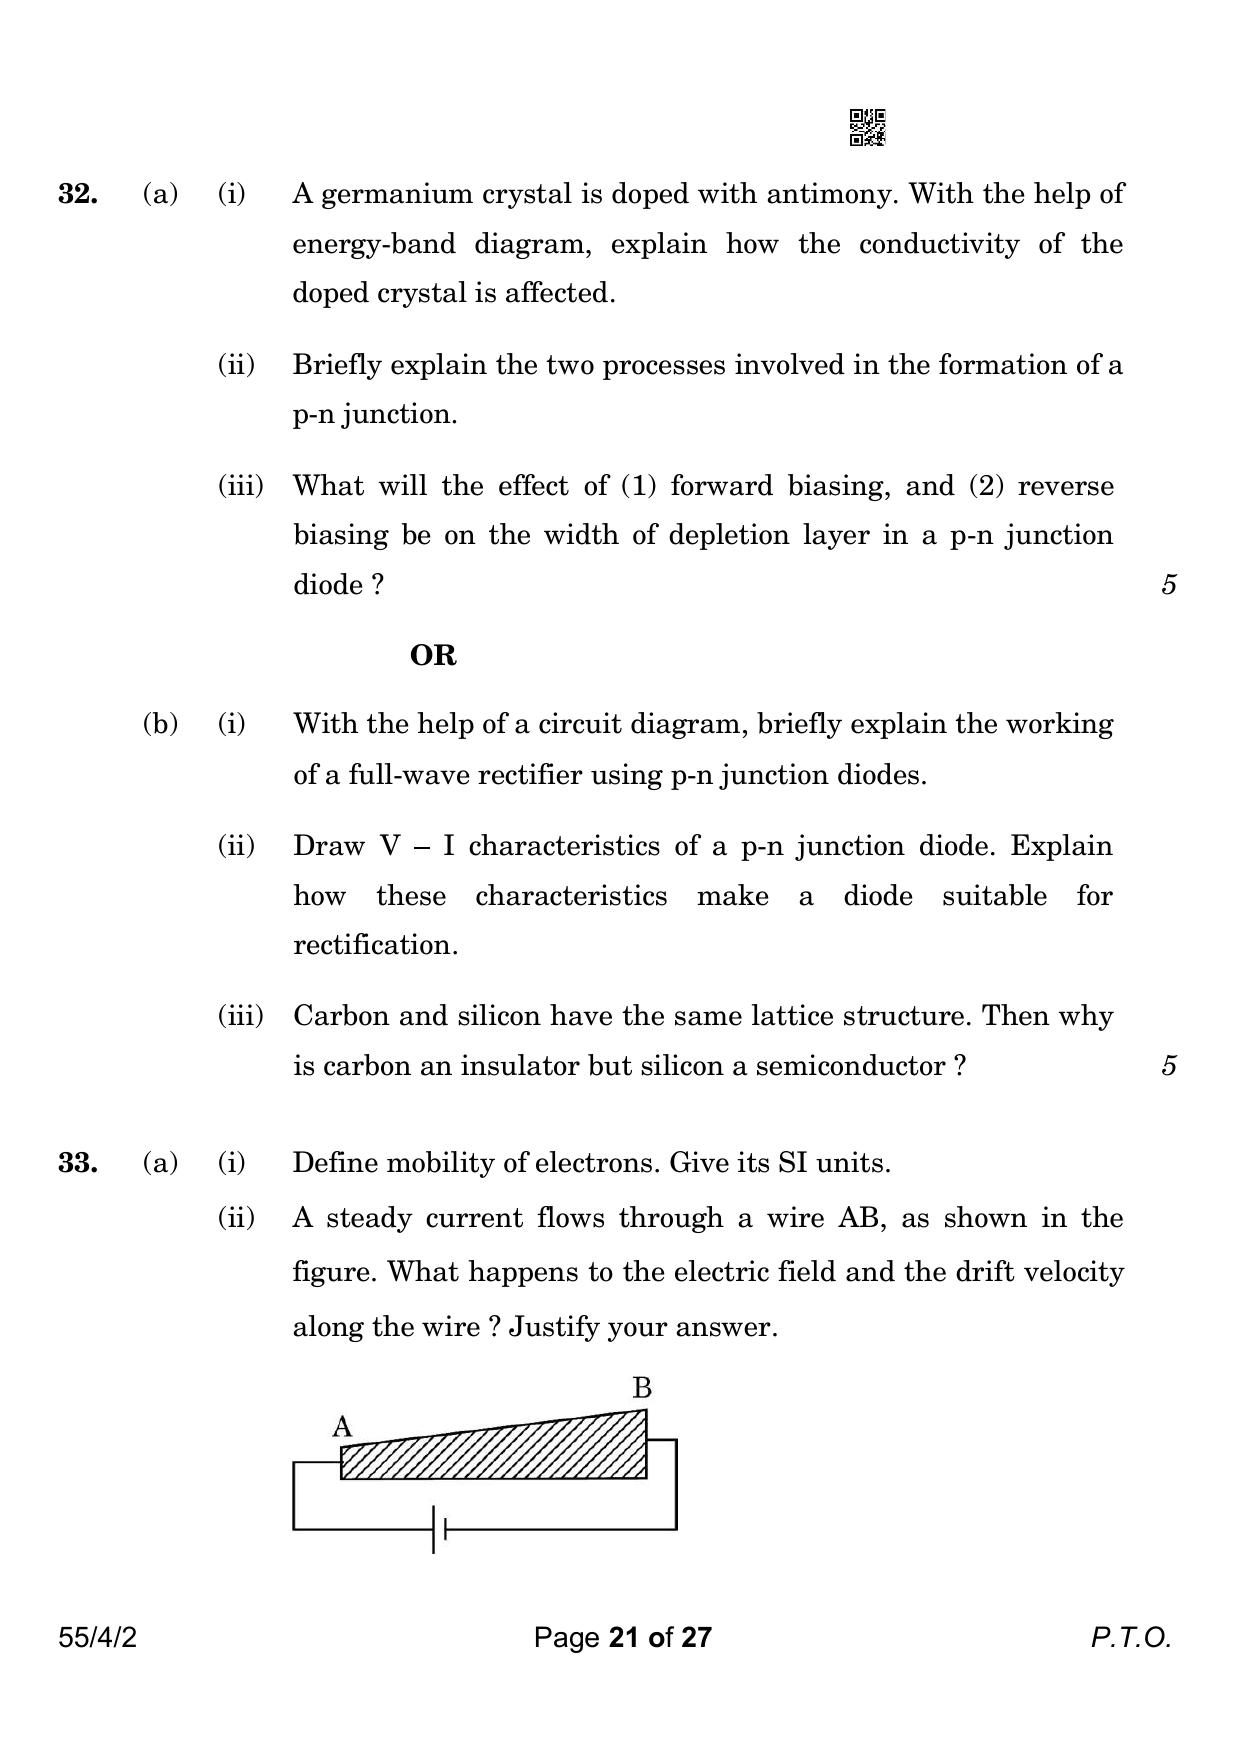 CBSE Class 12 55-4-2 Physics 2023 Question Paper - Page 21